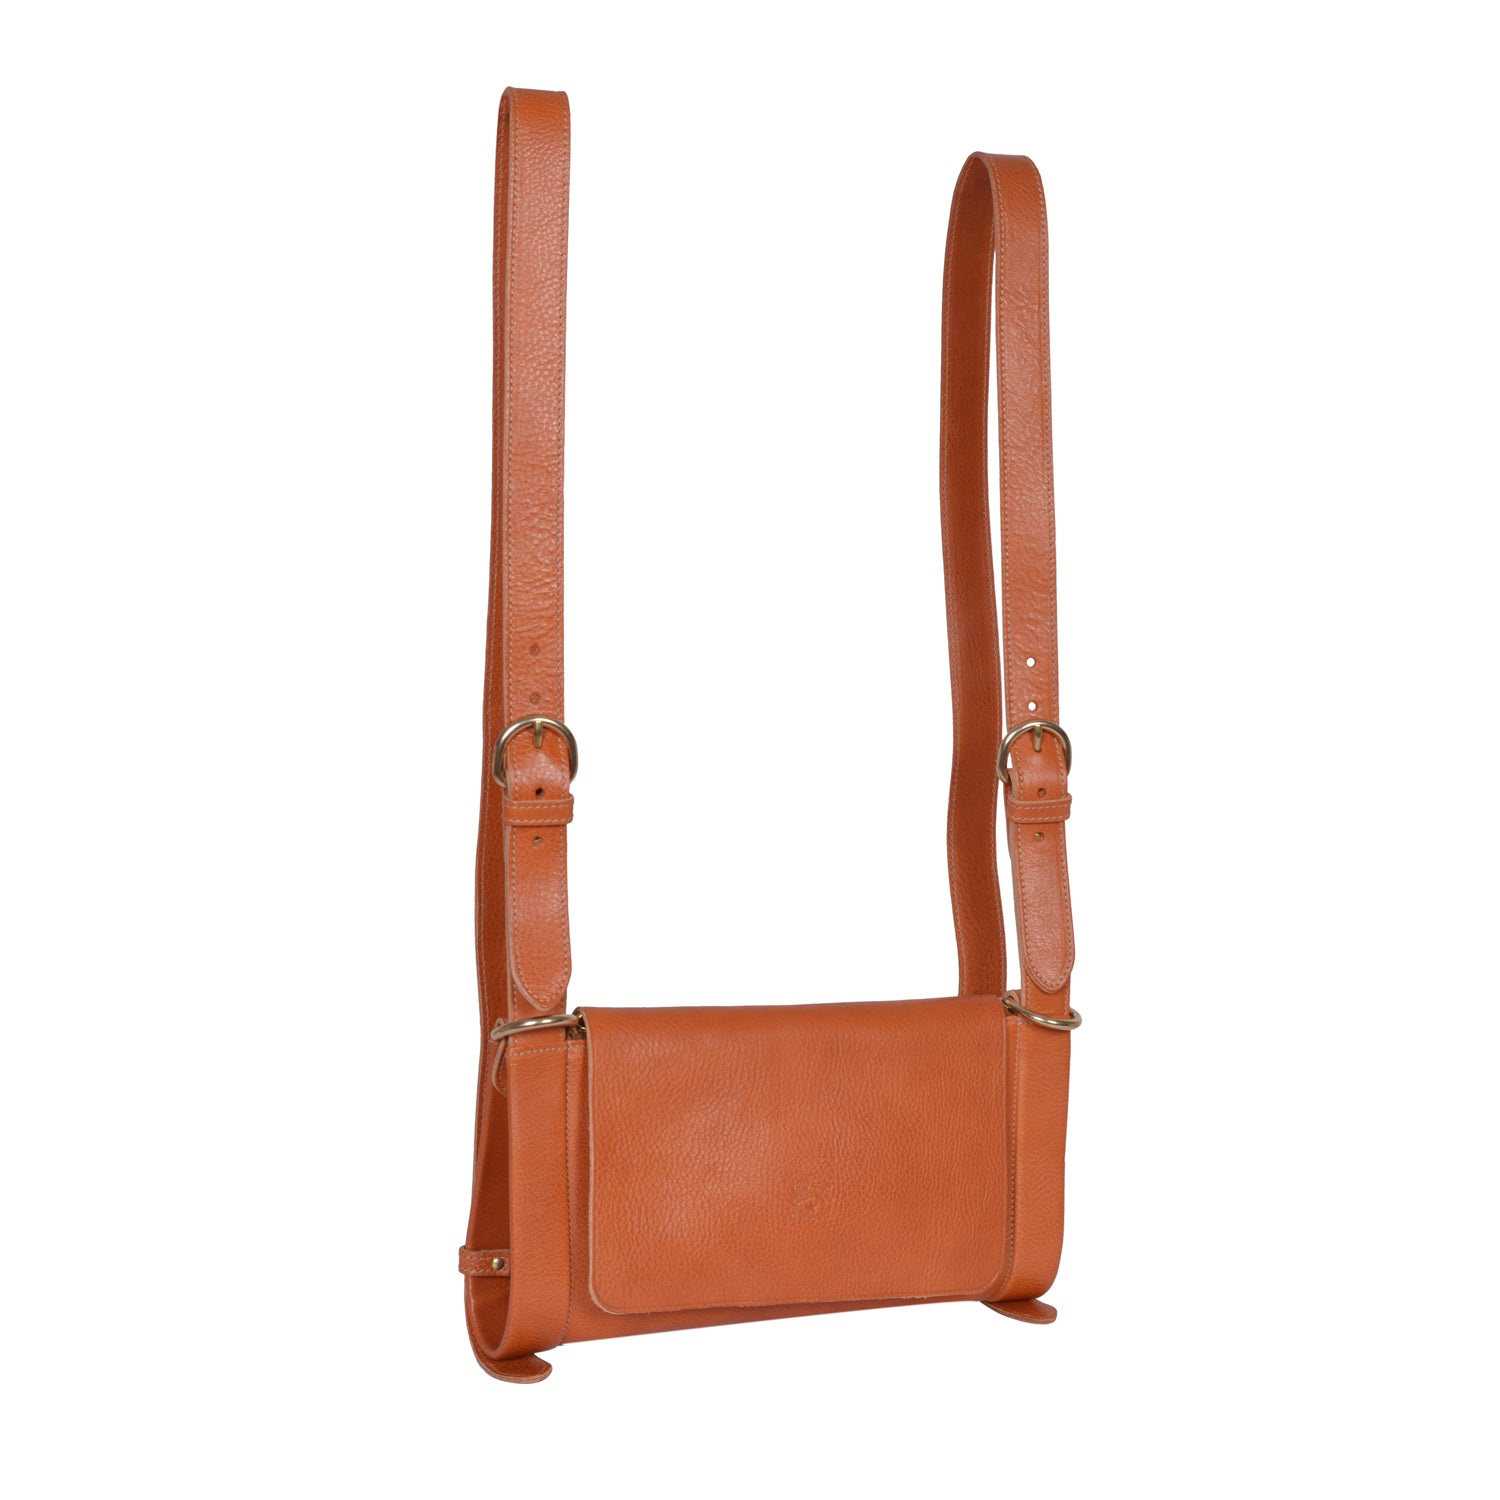 IL BISONTE ESCAPE WOMEN'S  BACKPACK  IN CARAMEL COWHIDE LEATHER